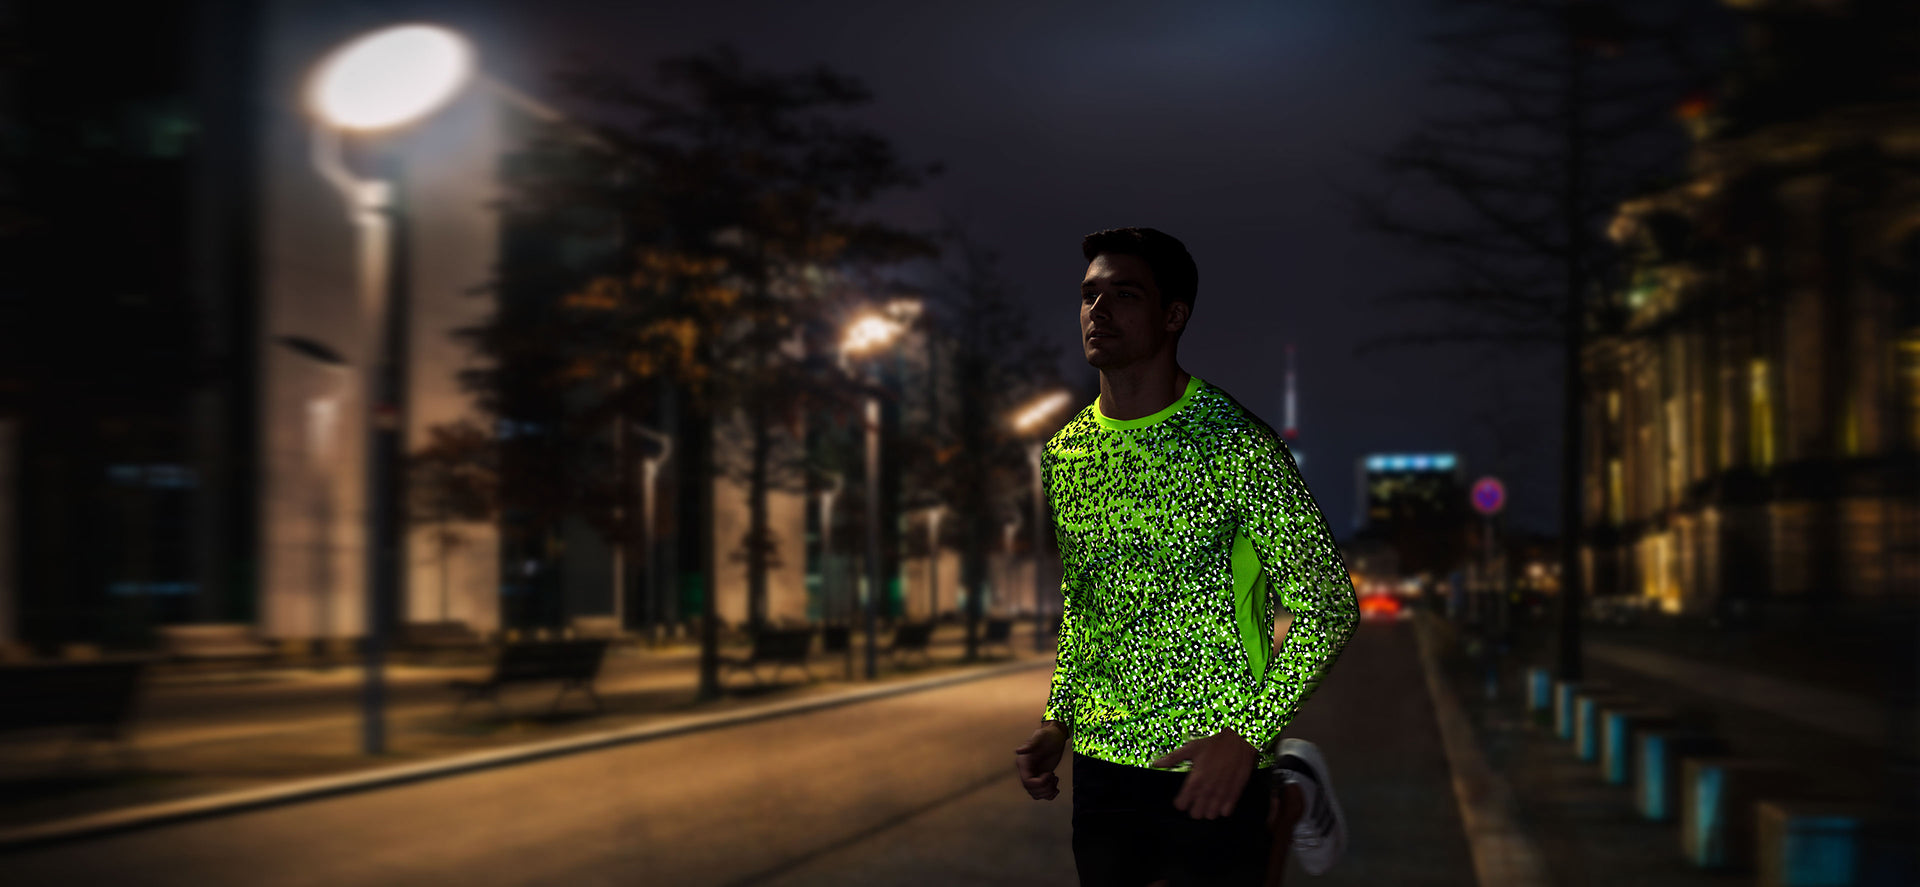 Review: Top Reflective Running Gear for Enhanced Safety